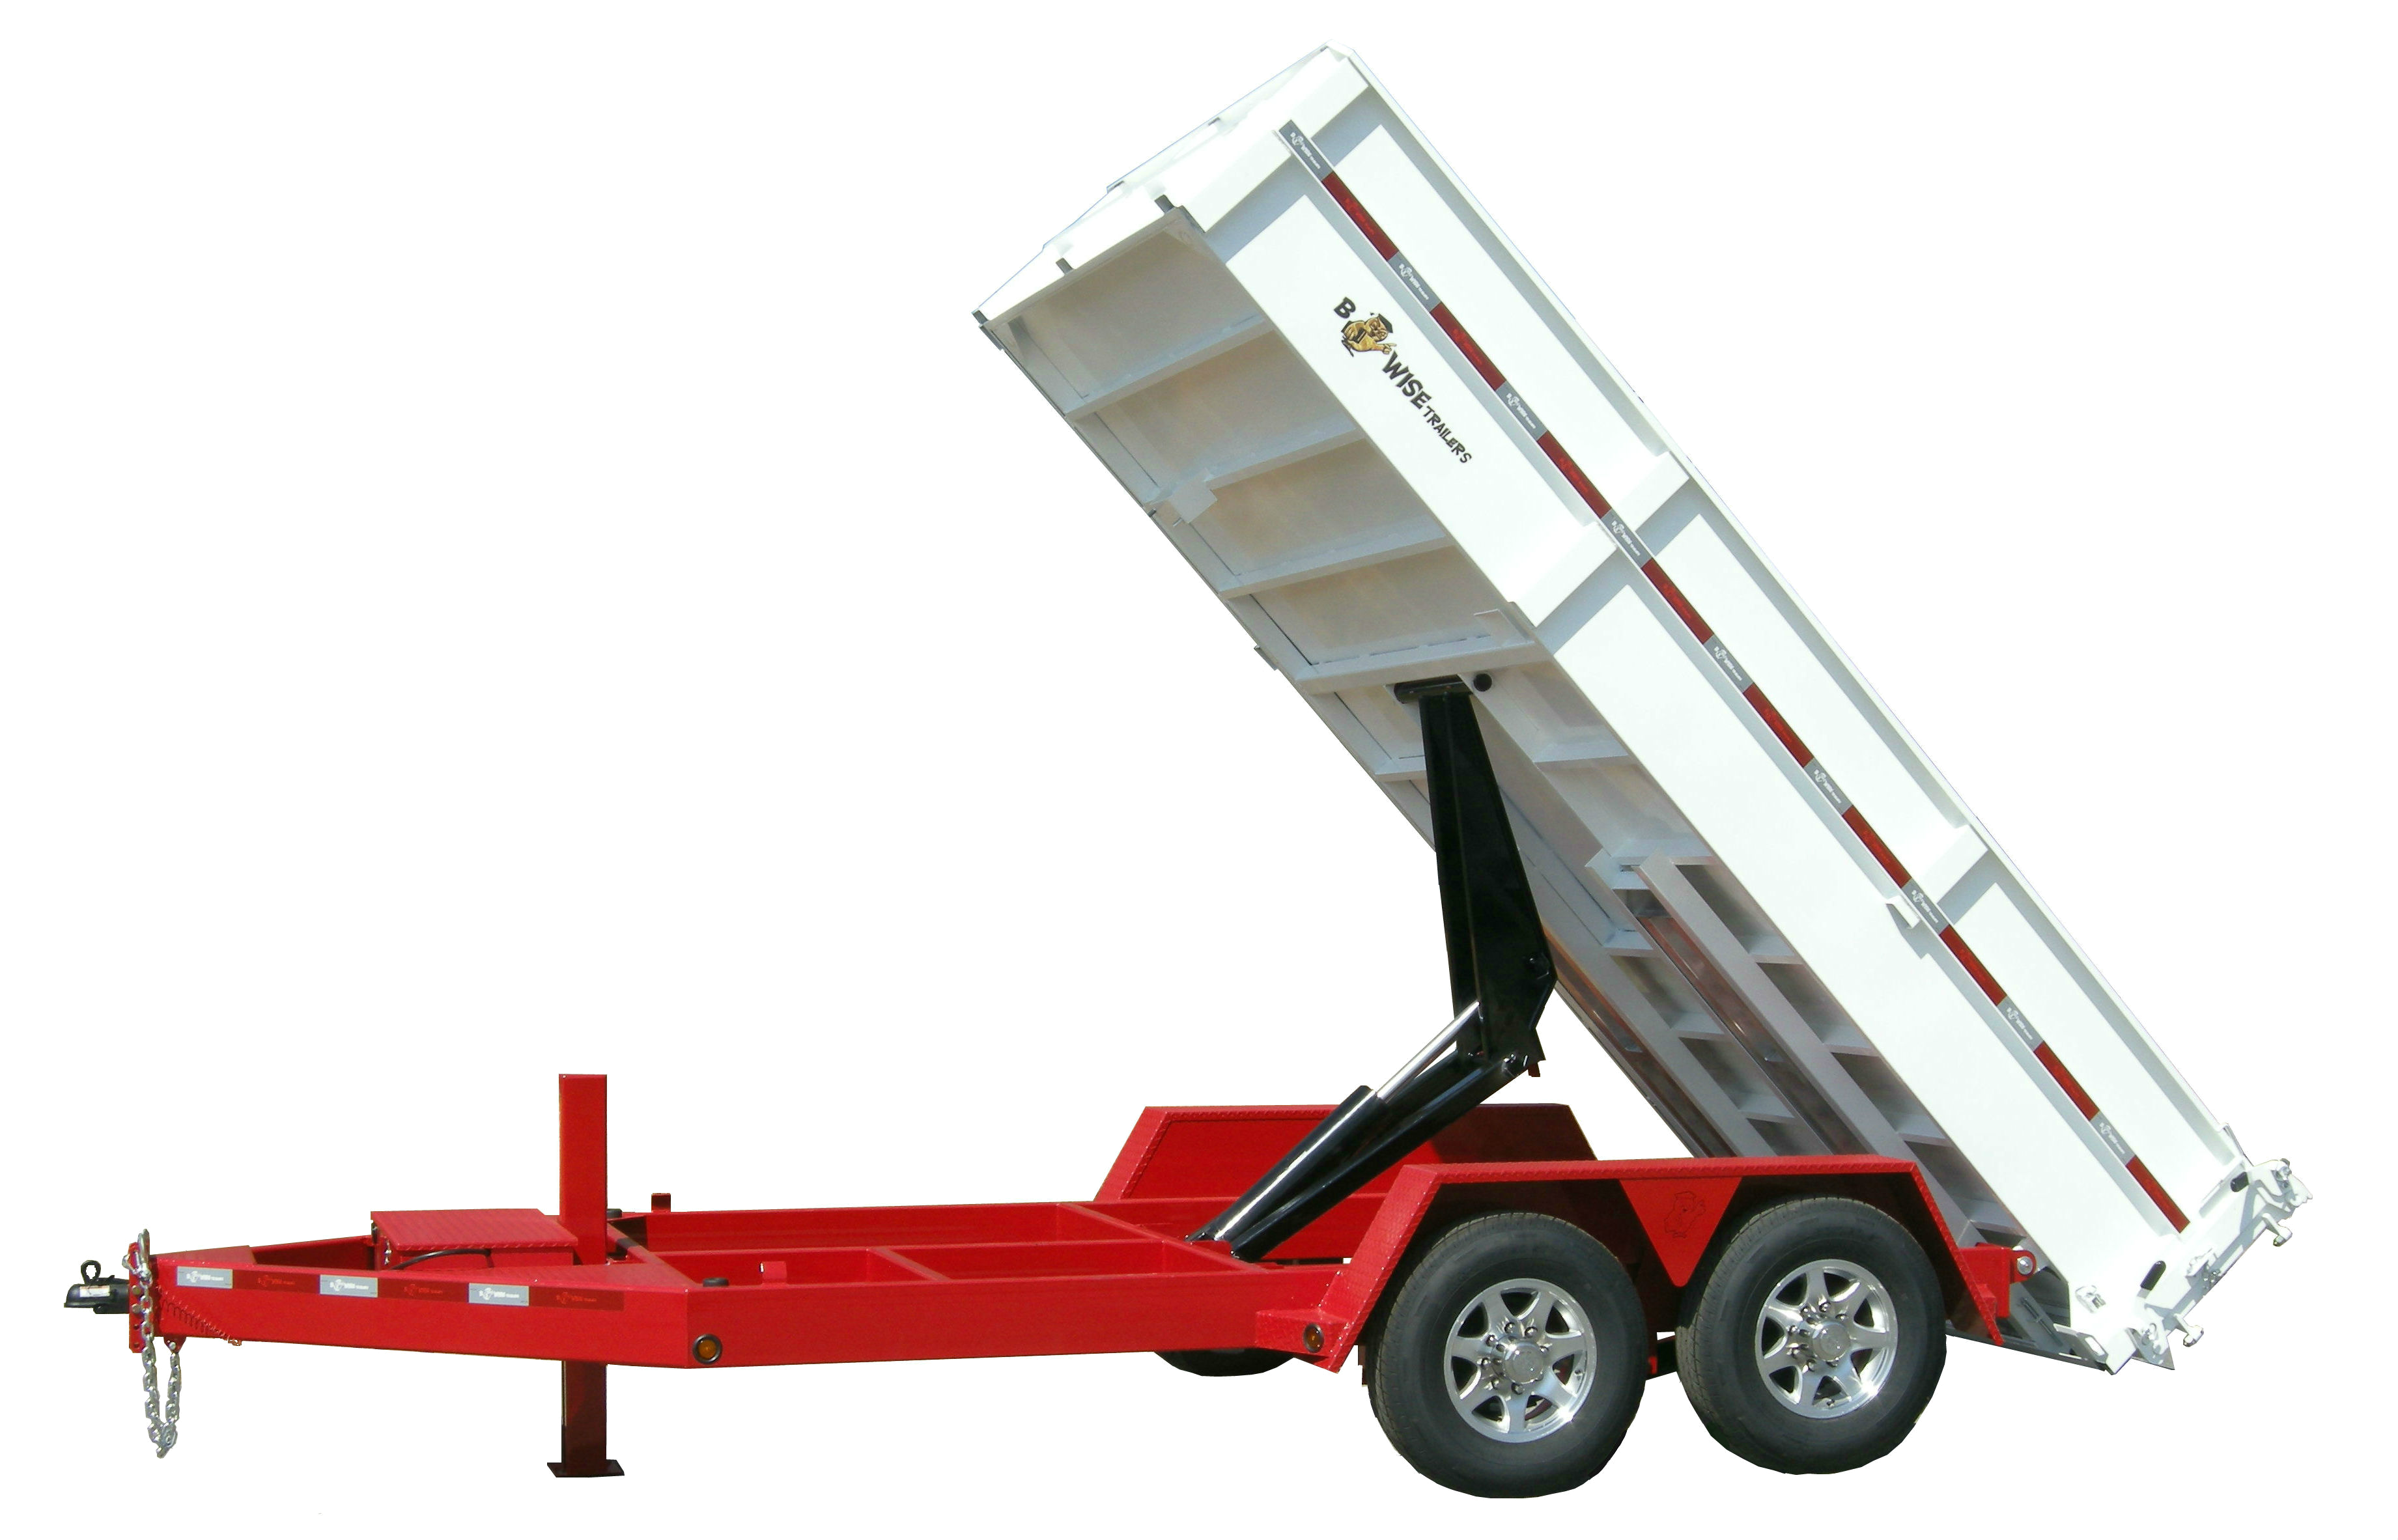 BWise Tube Frame Low Profile Dump Trailers